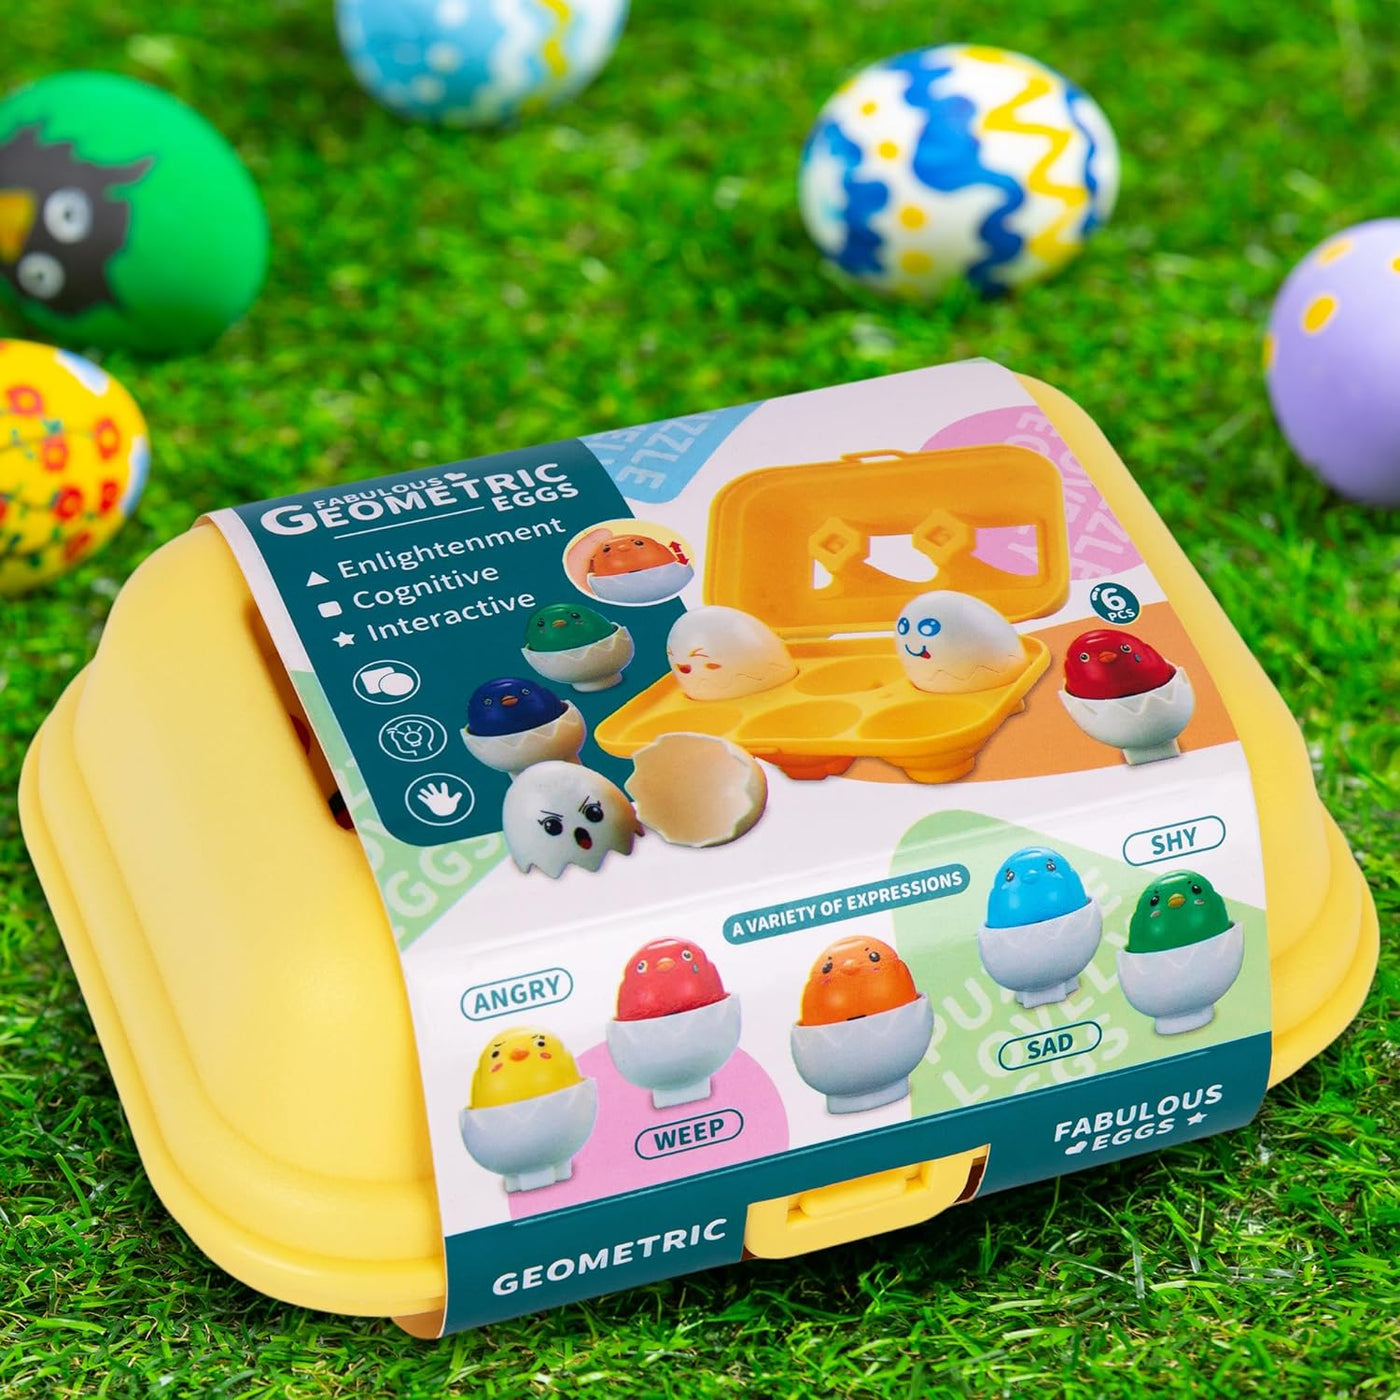 Matching Eggs for Easter - Carton of 6 Egg Matching Toys